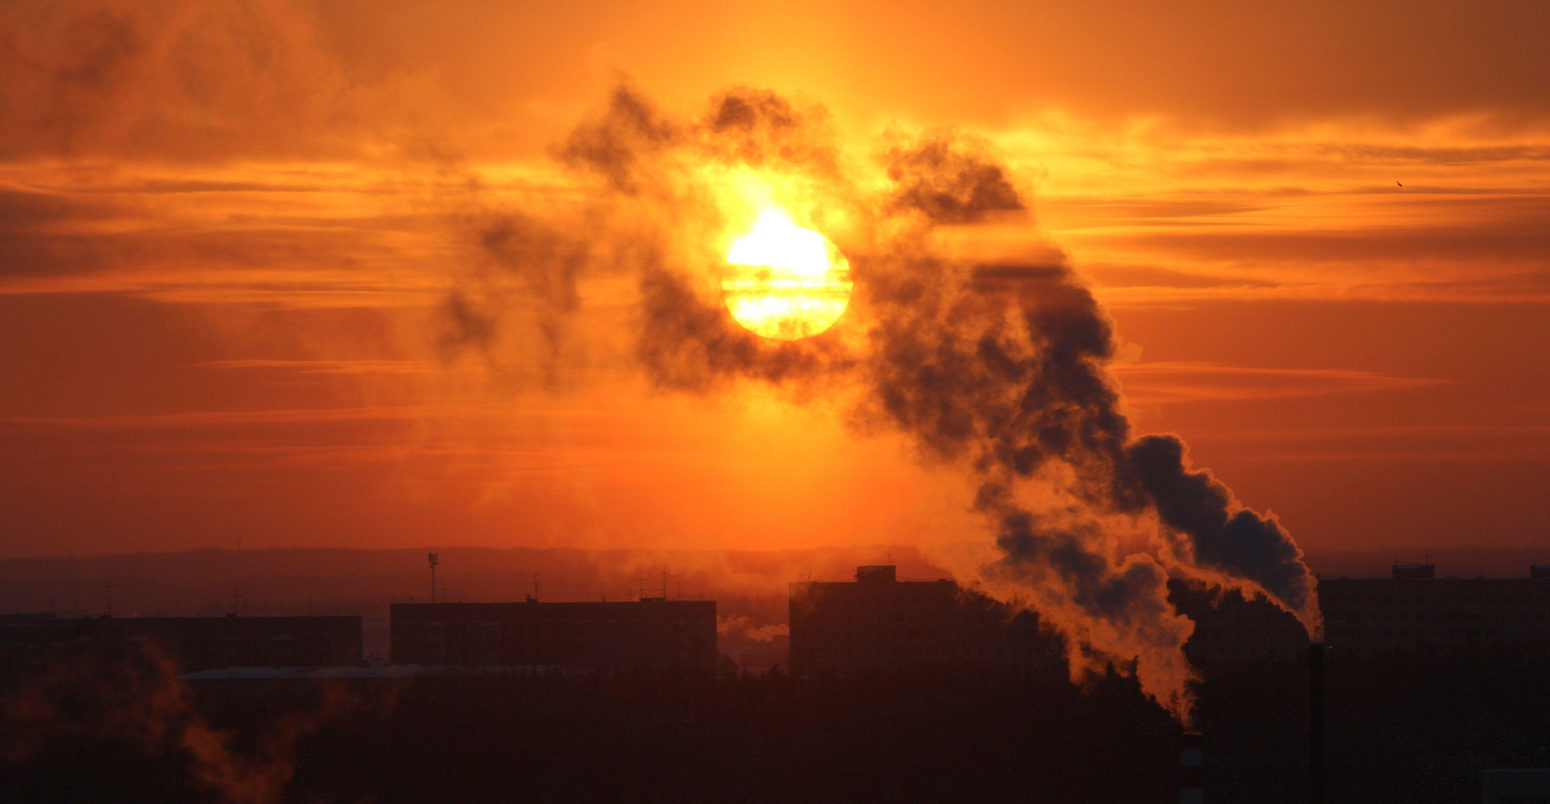 Red-sun-at-sunset-shrouded-in-smoke-from-plant-chimneys-in-Russia